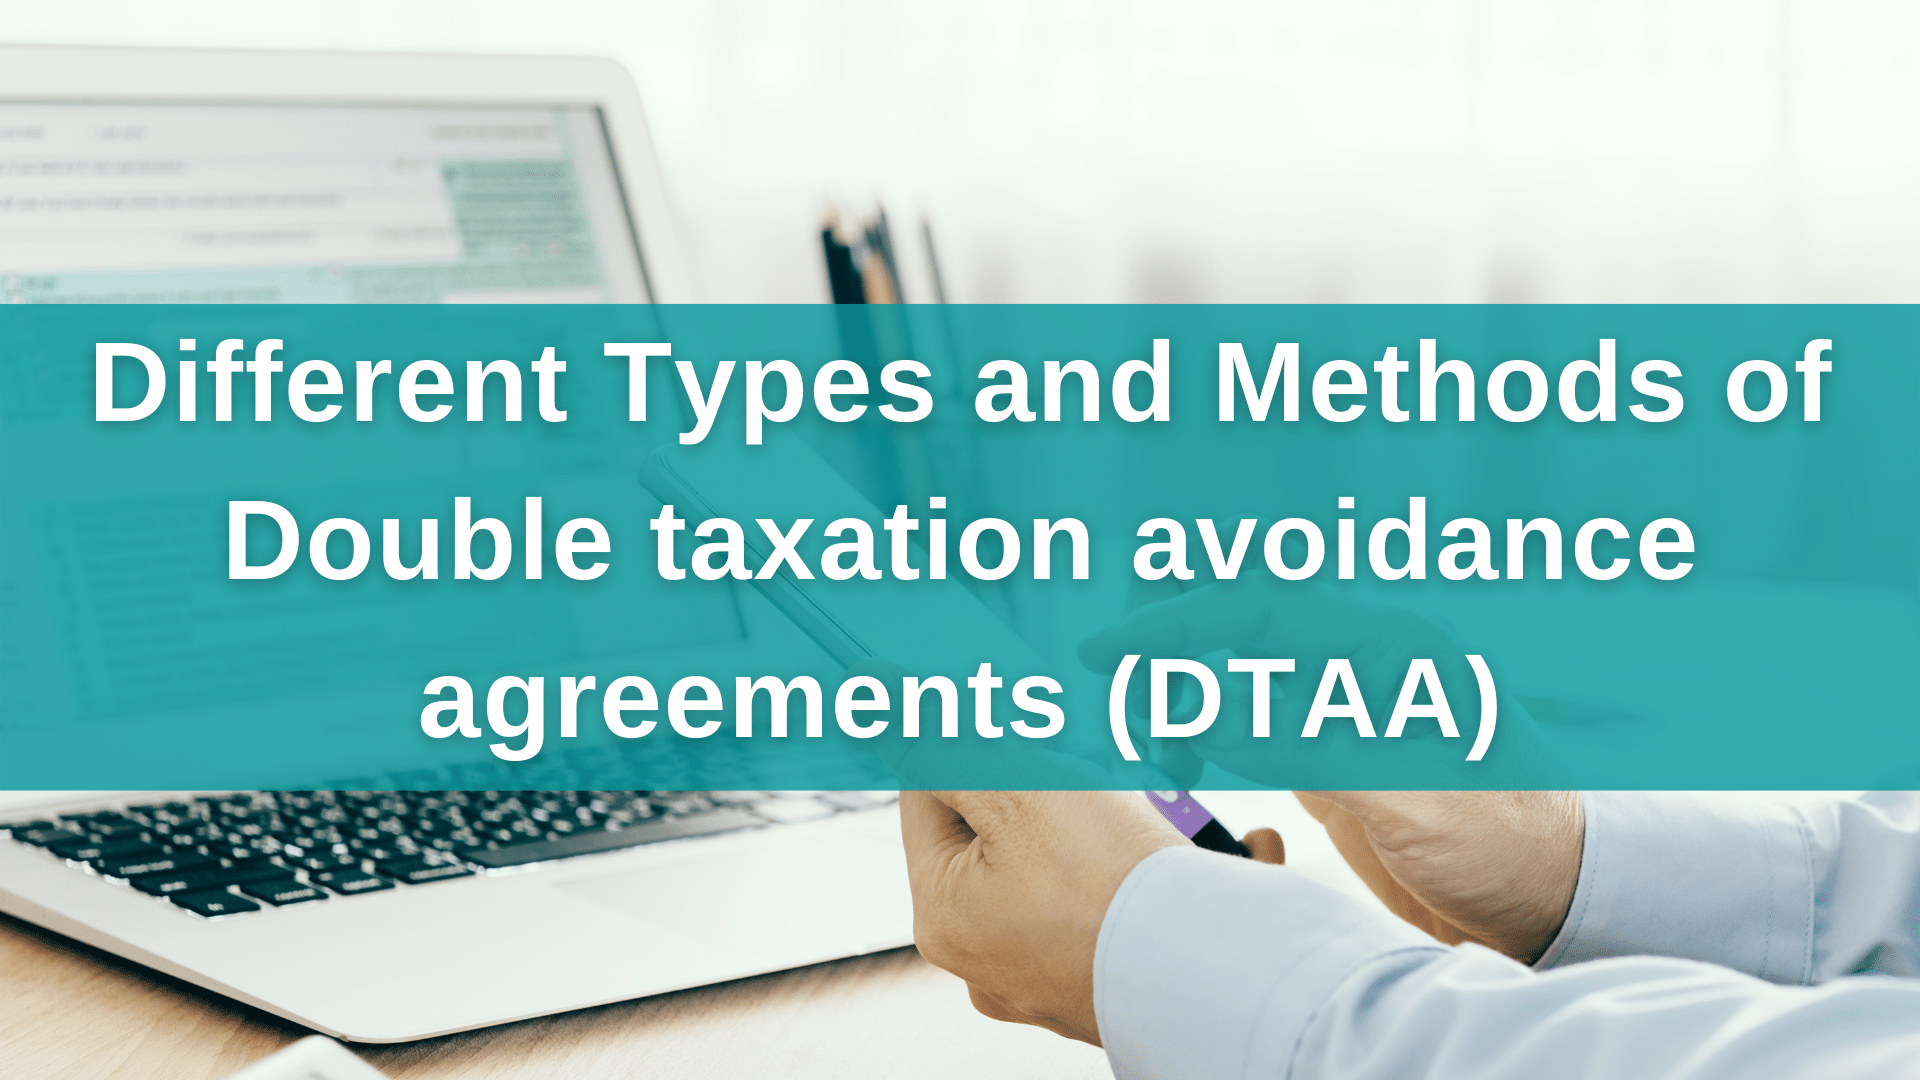 Different Types and Methods of Double taxation avoidance agreements (DTAA)